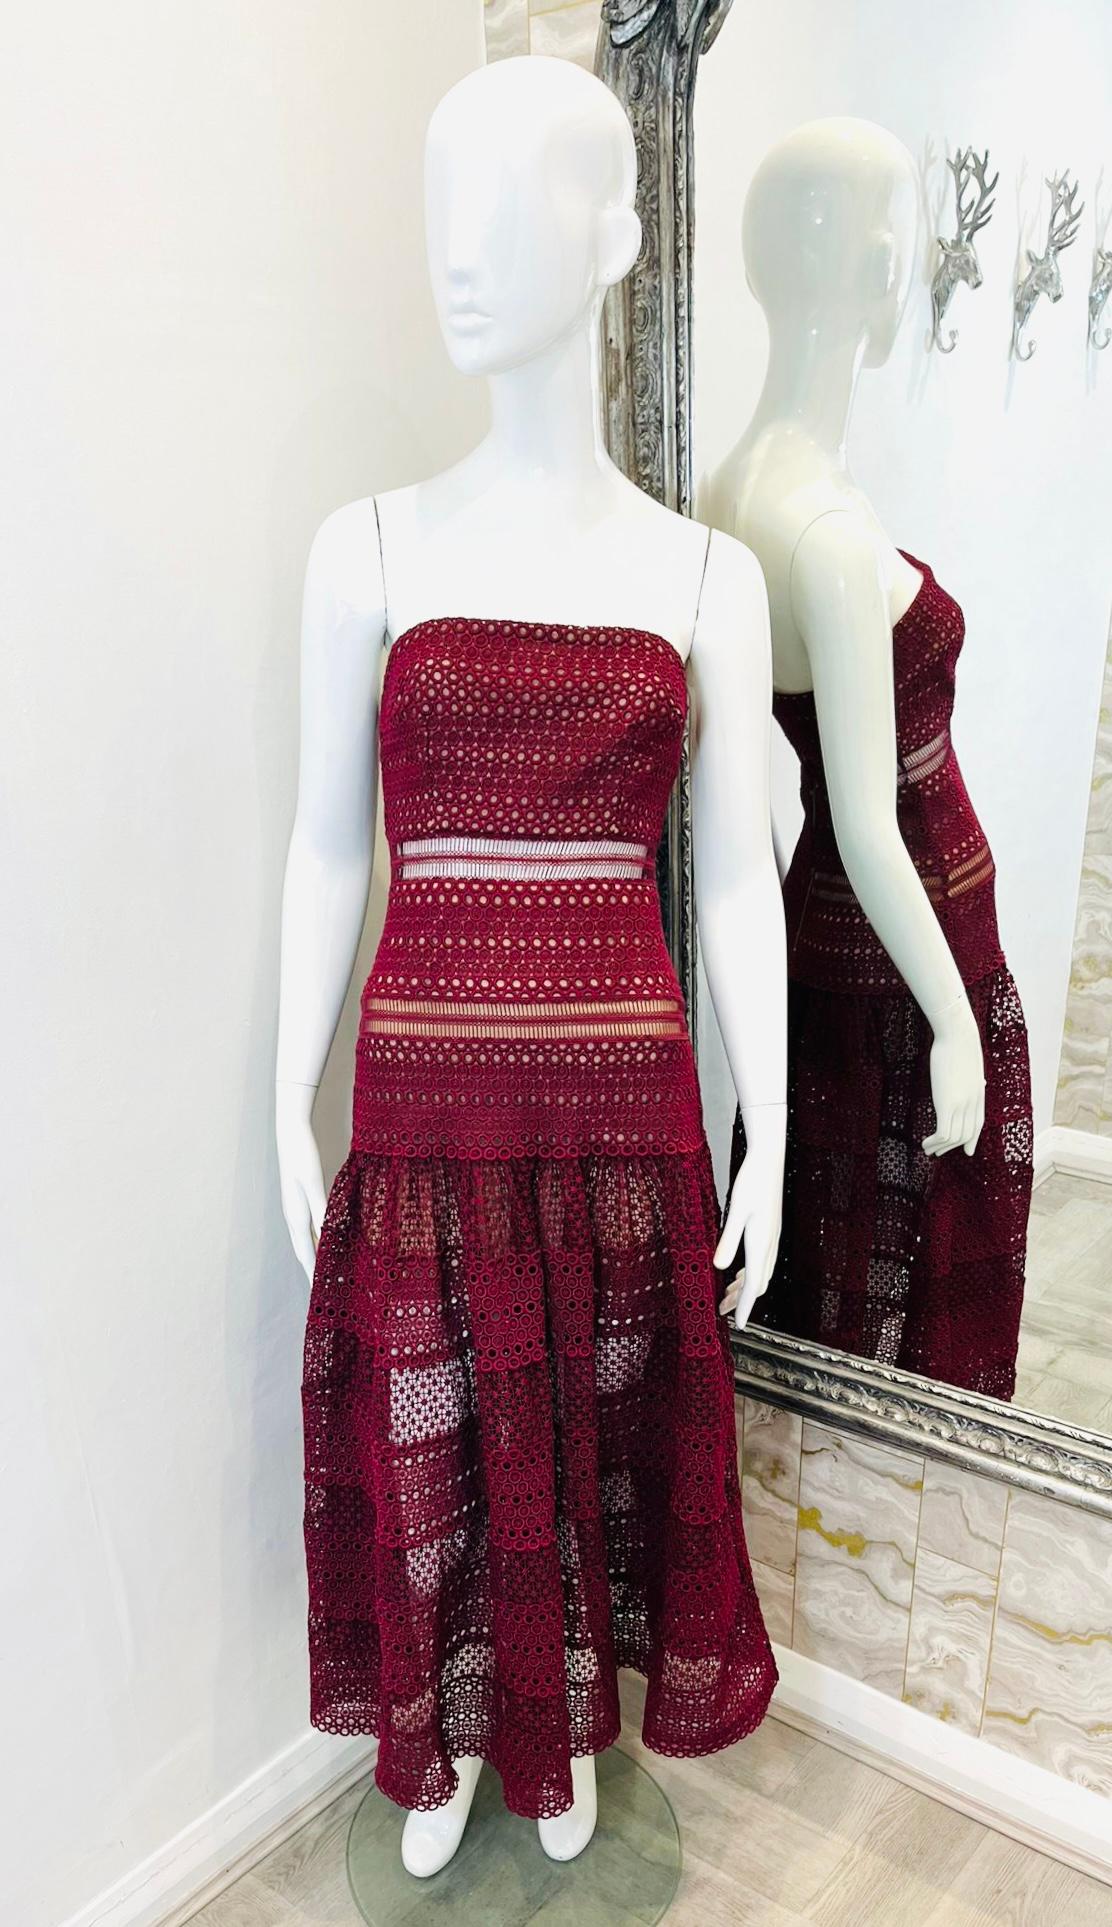 Self-Portrait Sculpted Lace Dress

Burgundy wine sleeveless dress designed with intricate lace details.

Featuring fit-and-flare silhouette, waisted style and partial nude lining.

Accented with see-through detailing to the skirt and zip fastening